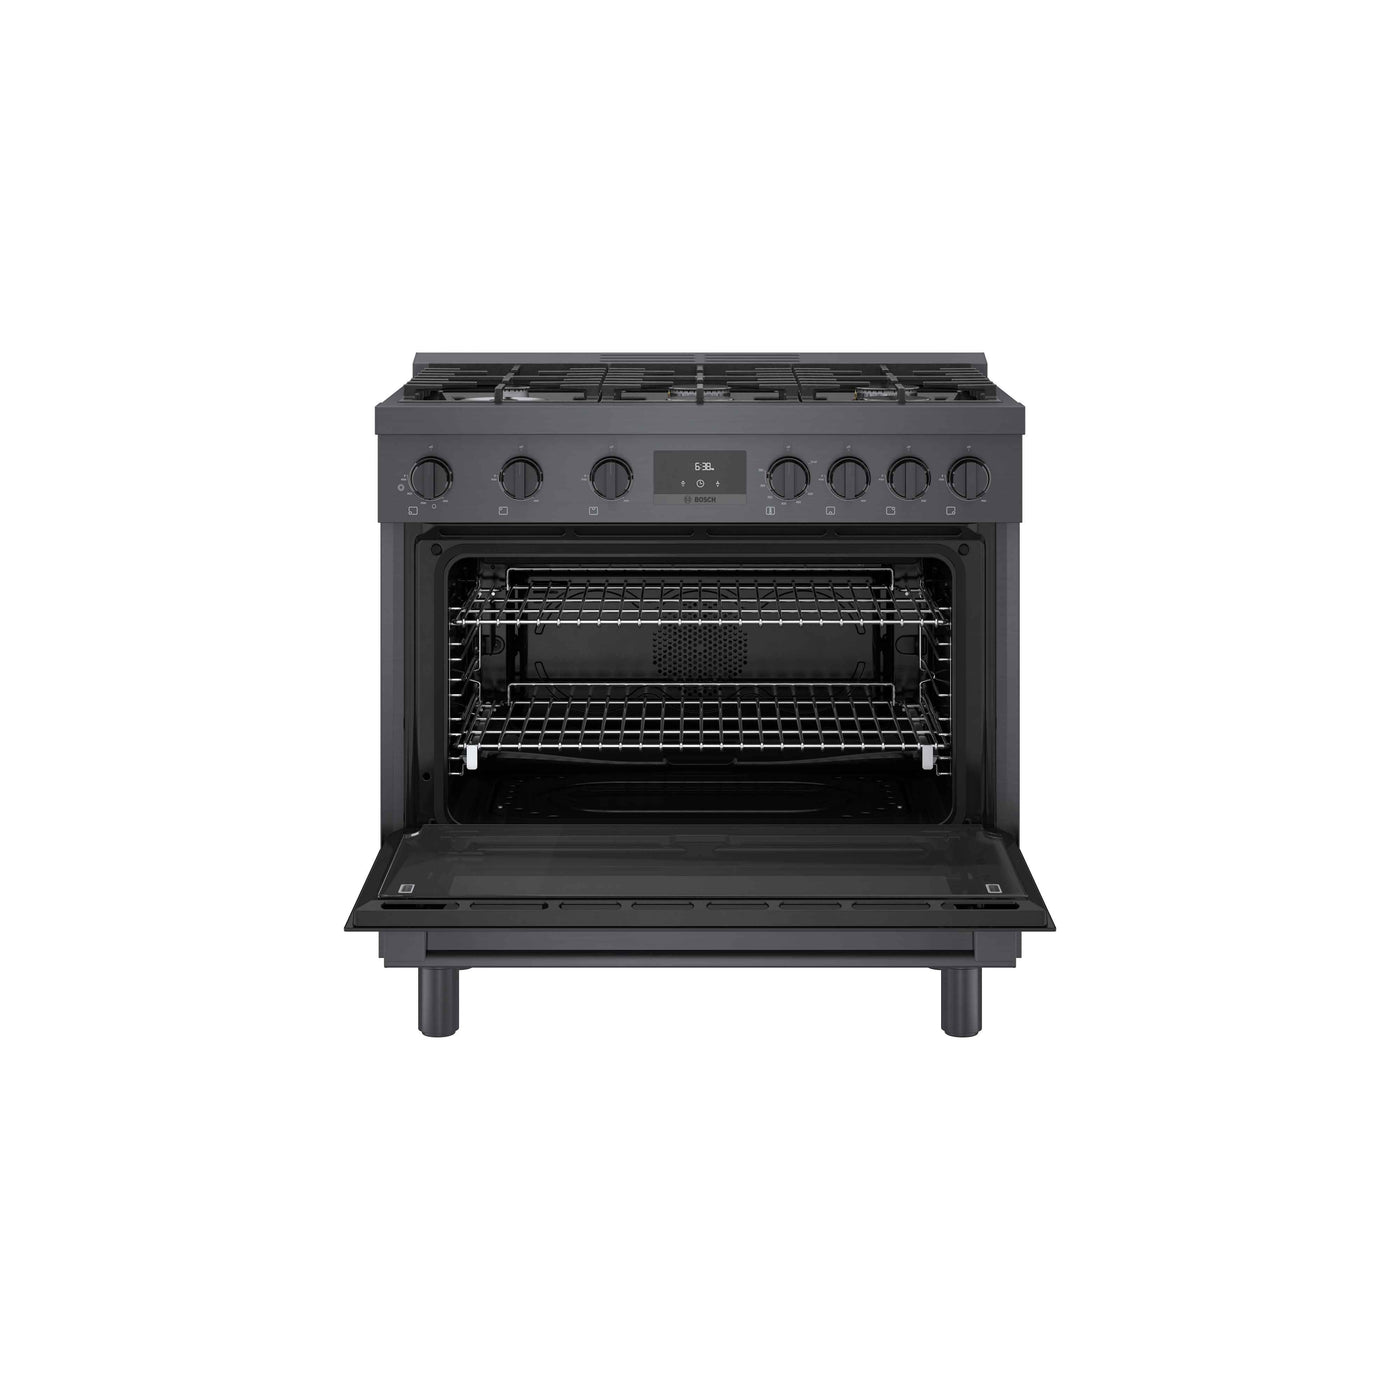 Bosch 36" Industrial Style Gas Range Black Stainless Steel - HGS8645UC